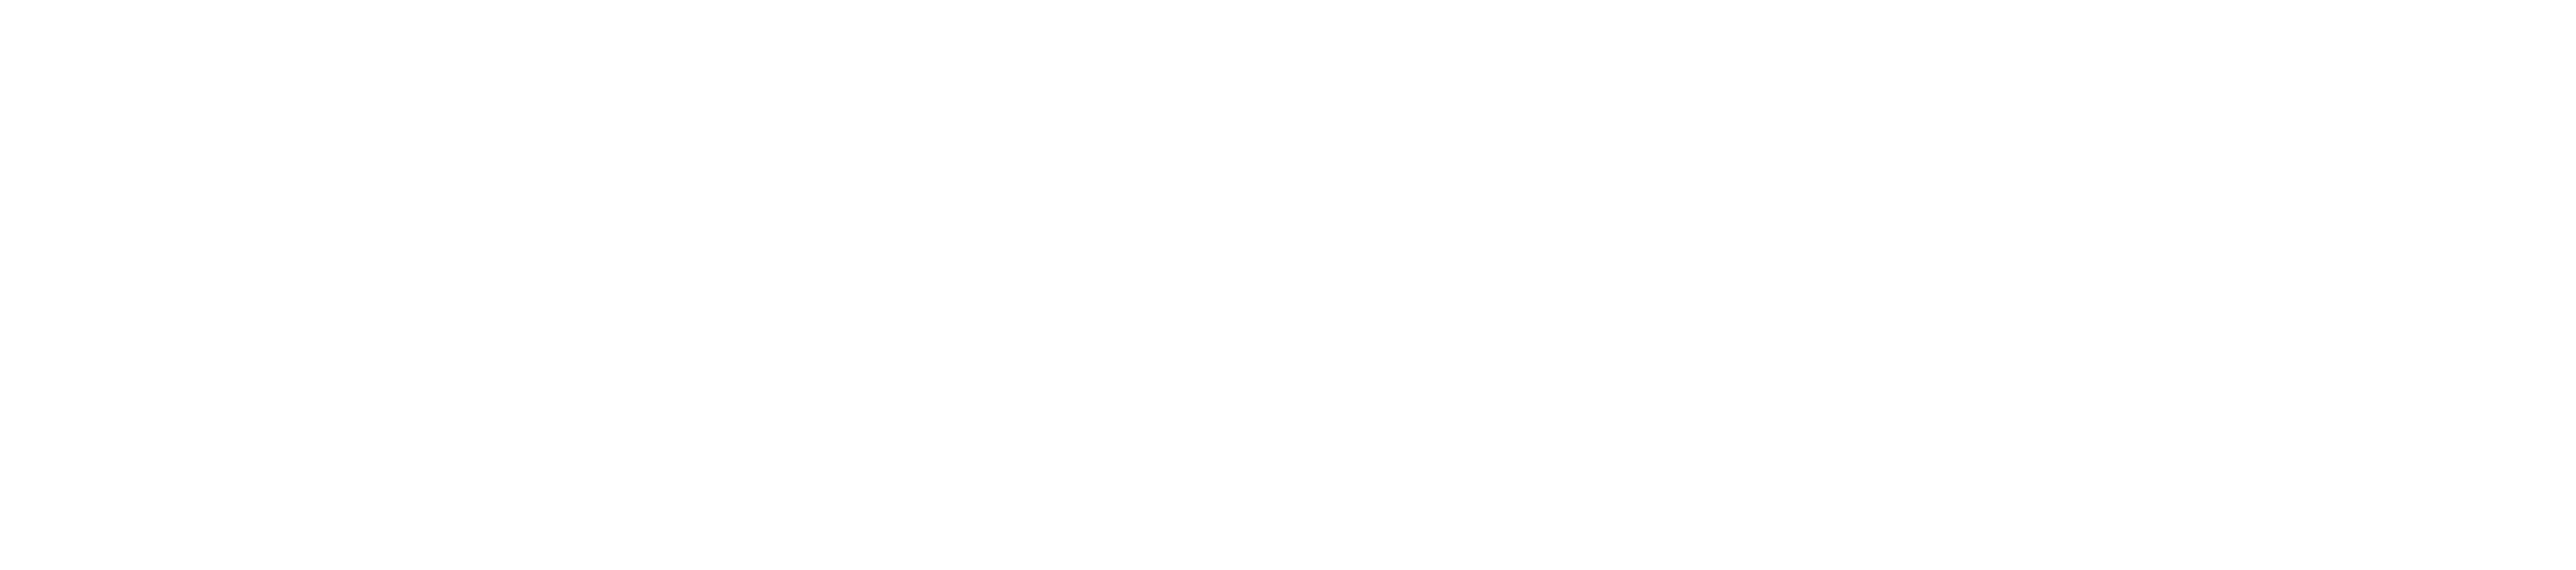 SYNBIOCHEM - Manchester Synthetic Biology Research Centre for Fine and Speciality Chemicals